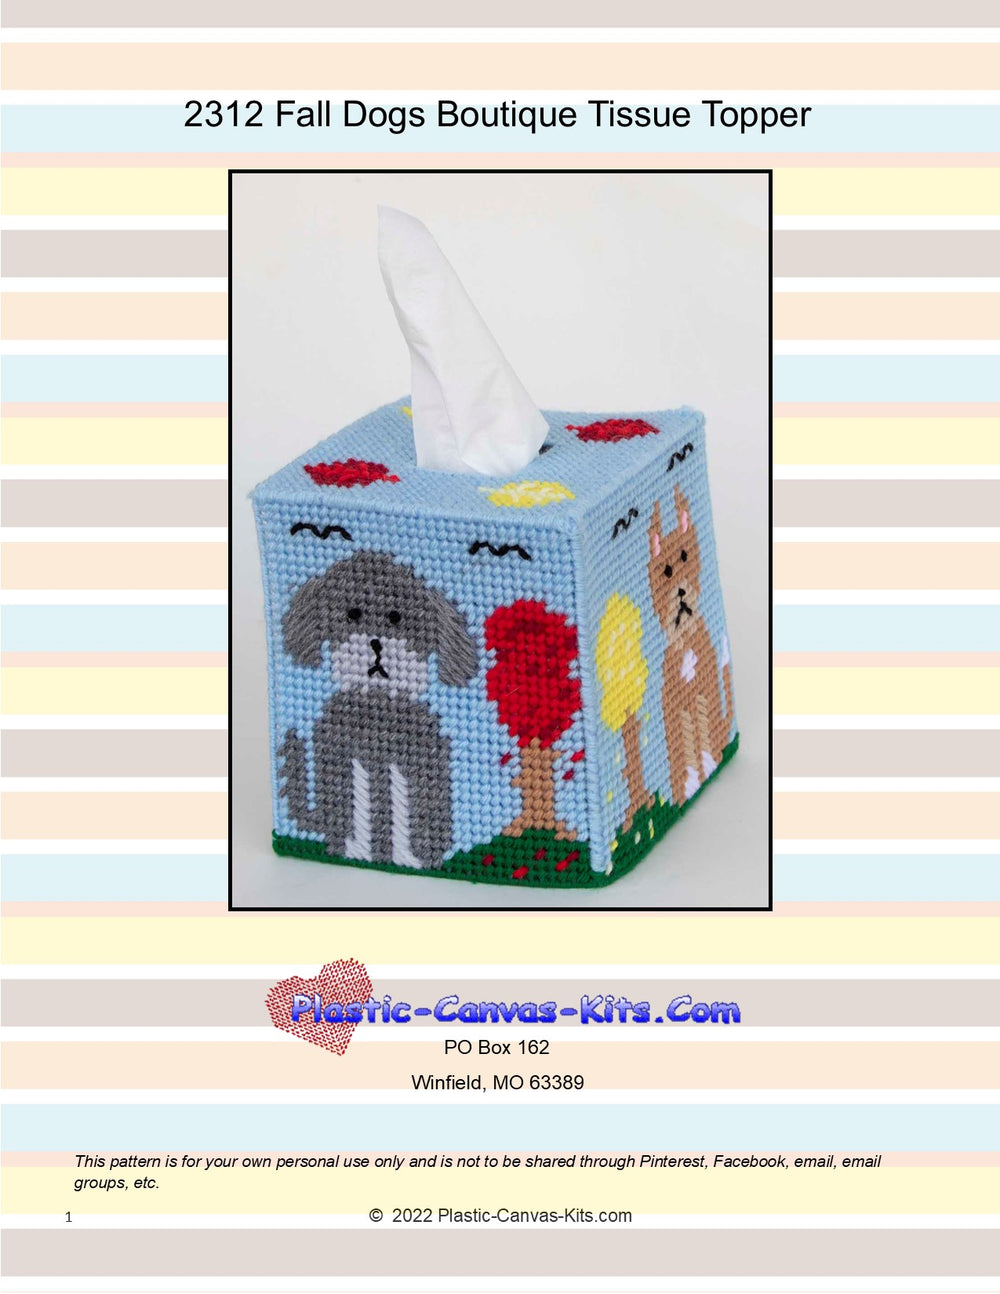 Fall Dogs Boutique Tissue Topper